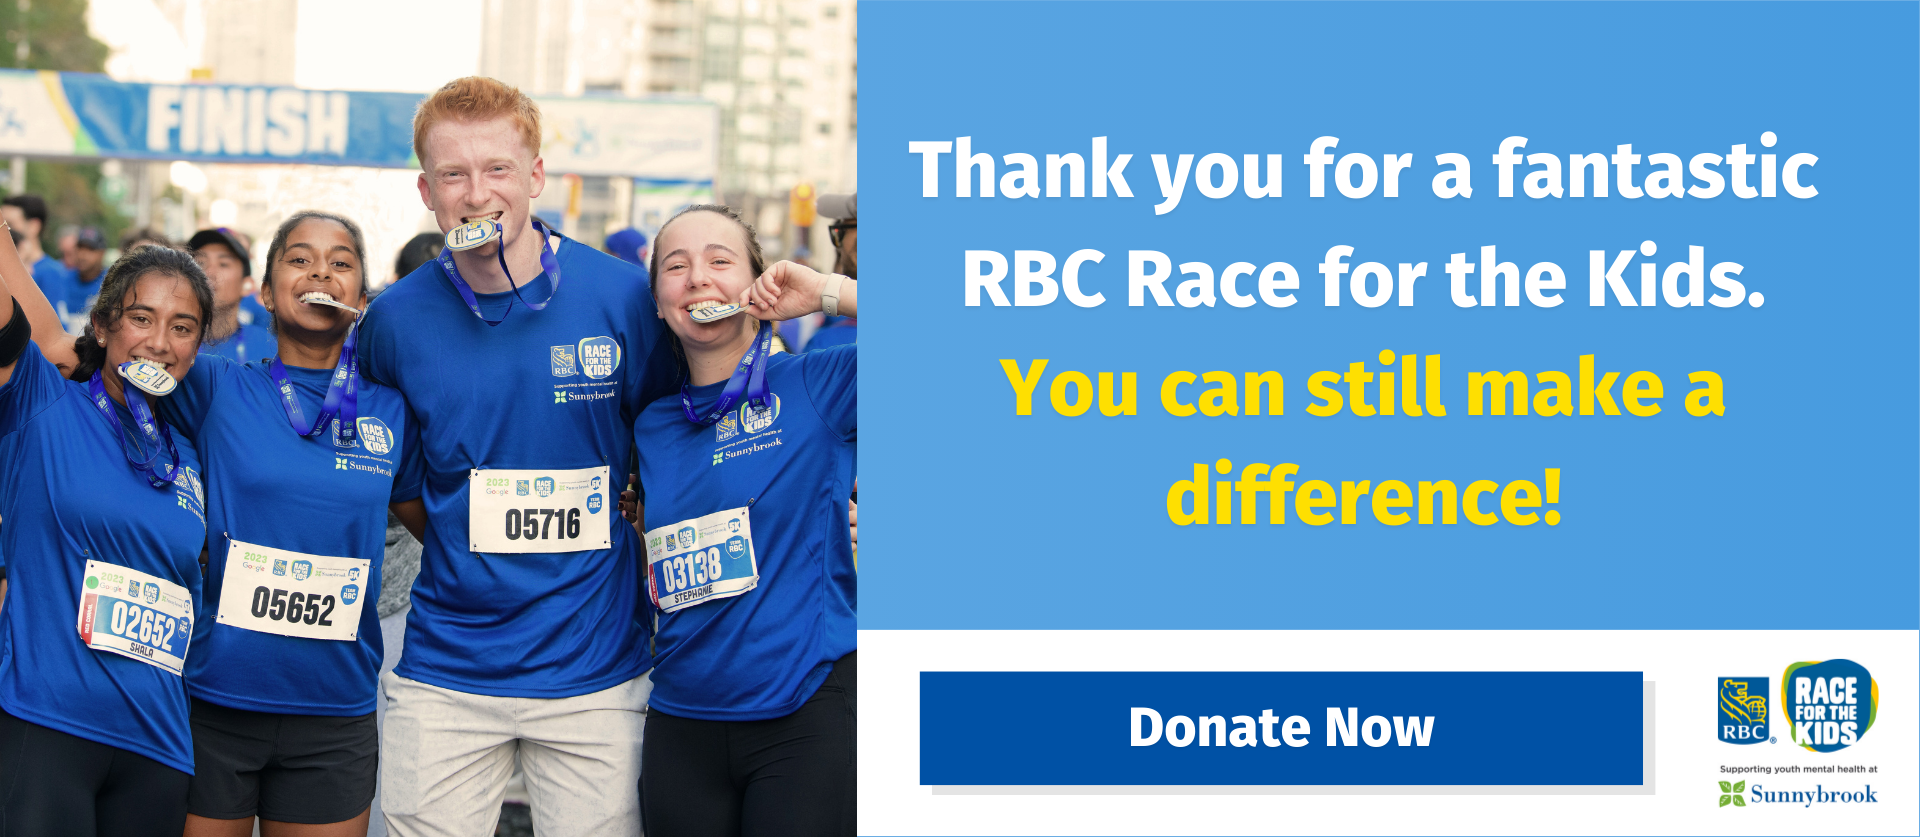 Thank You for a fantastic RBC Race for the Kids